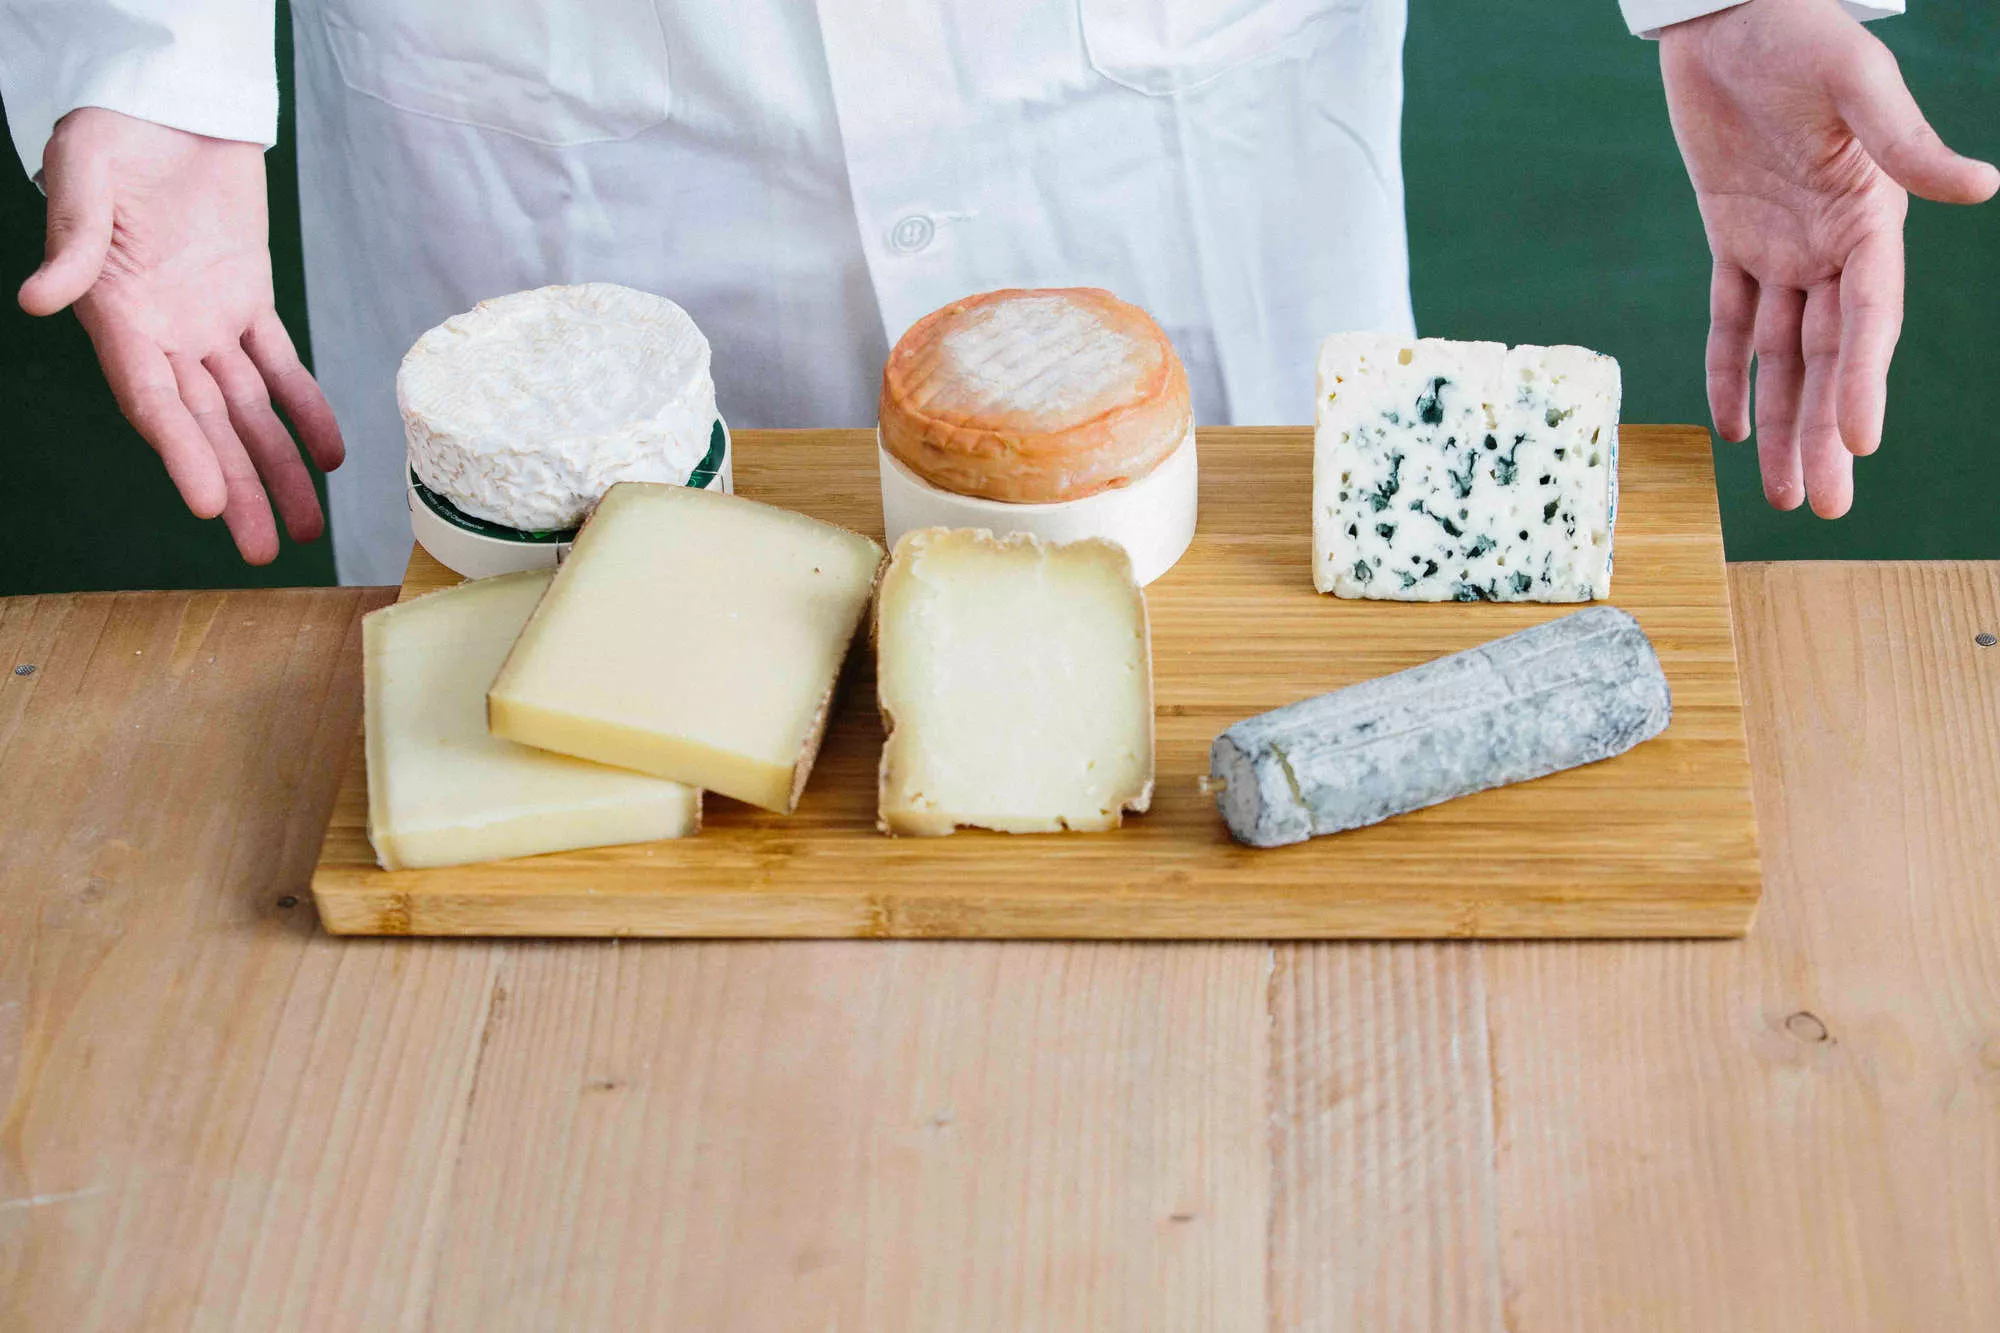 Le Cheese Geek in France, Europe | Cheesemakers - Rated 4.4